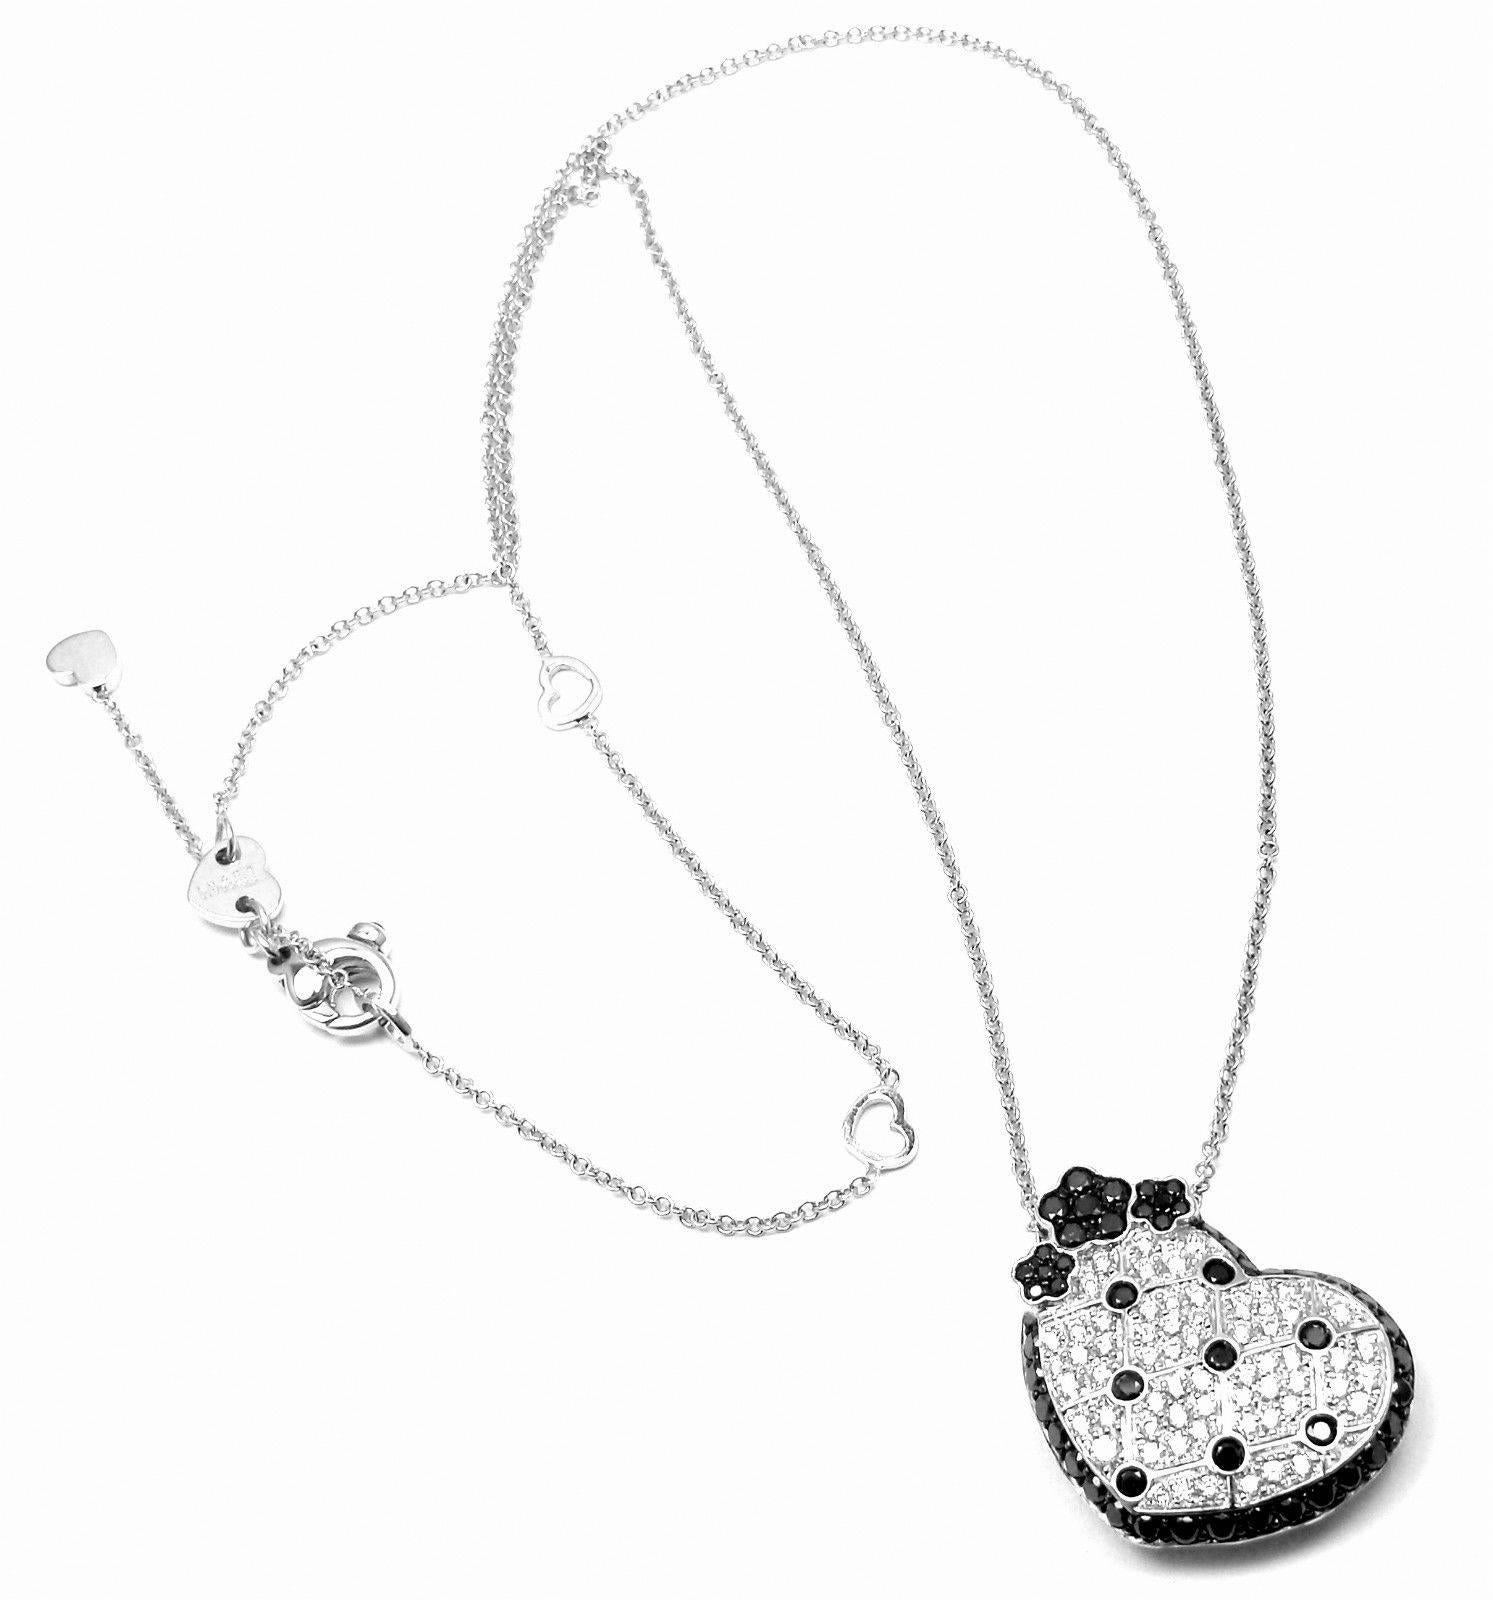 18k White Gold Large Heart Lulu Diamond And Sapphire Pendant Necklace
by Pasquale Bruni.
With Round brilliant cut diamonds VS1 clarity, G color total weight approx. 1.70ct, sapphire stones (other): .06ct
This necklace comes with Box, Certificate and